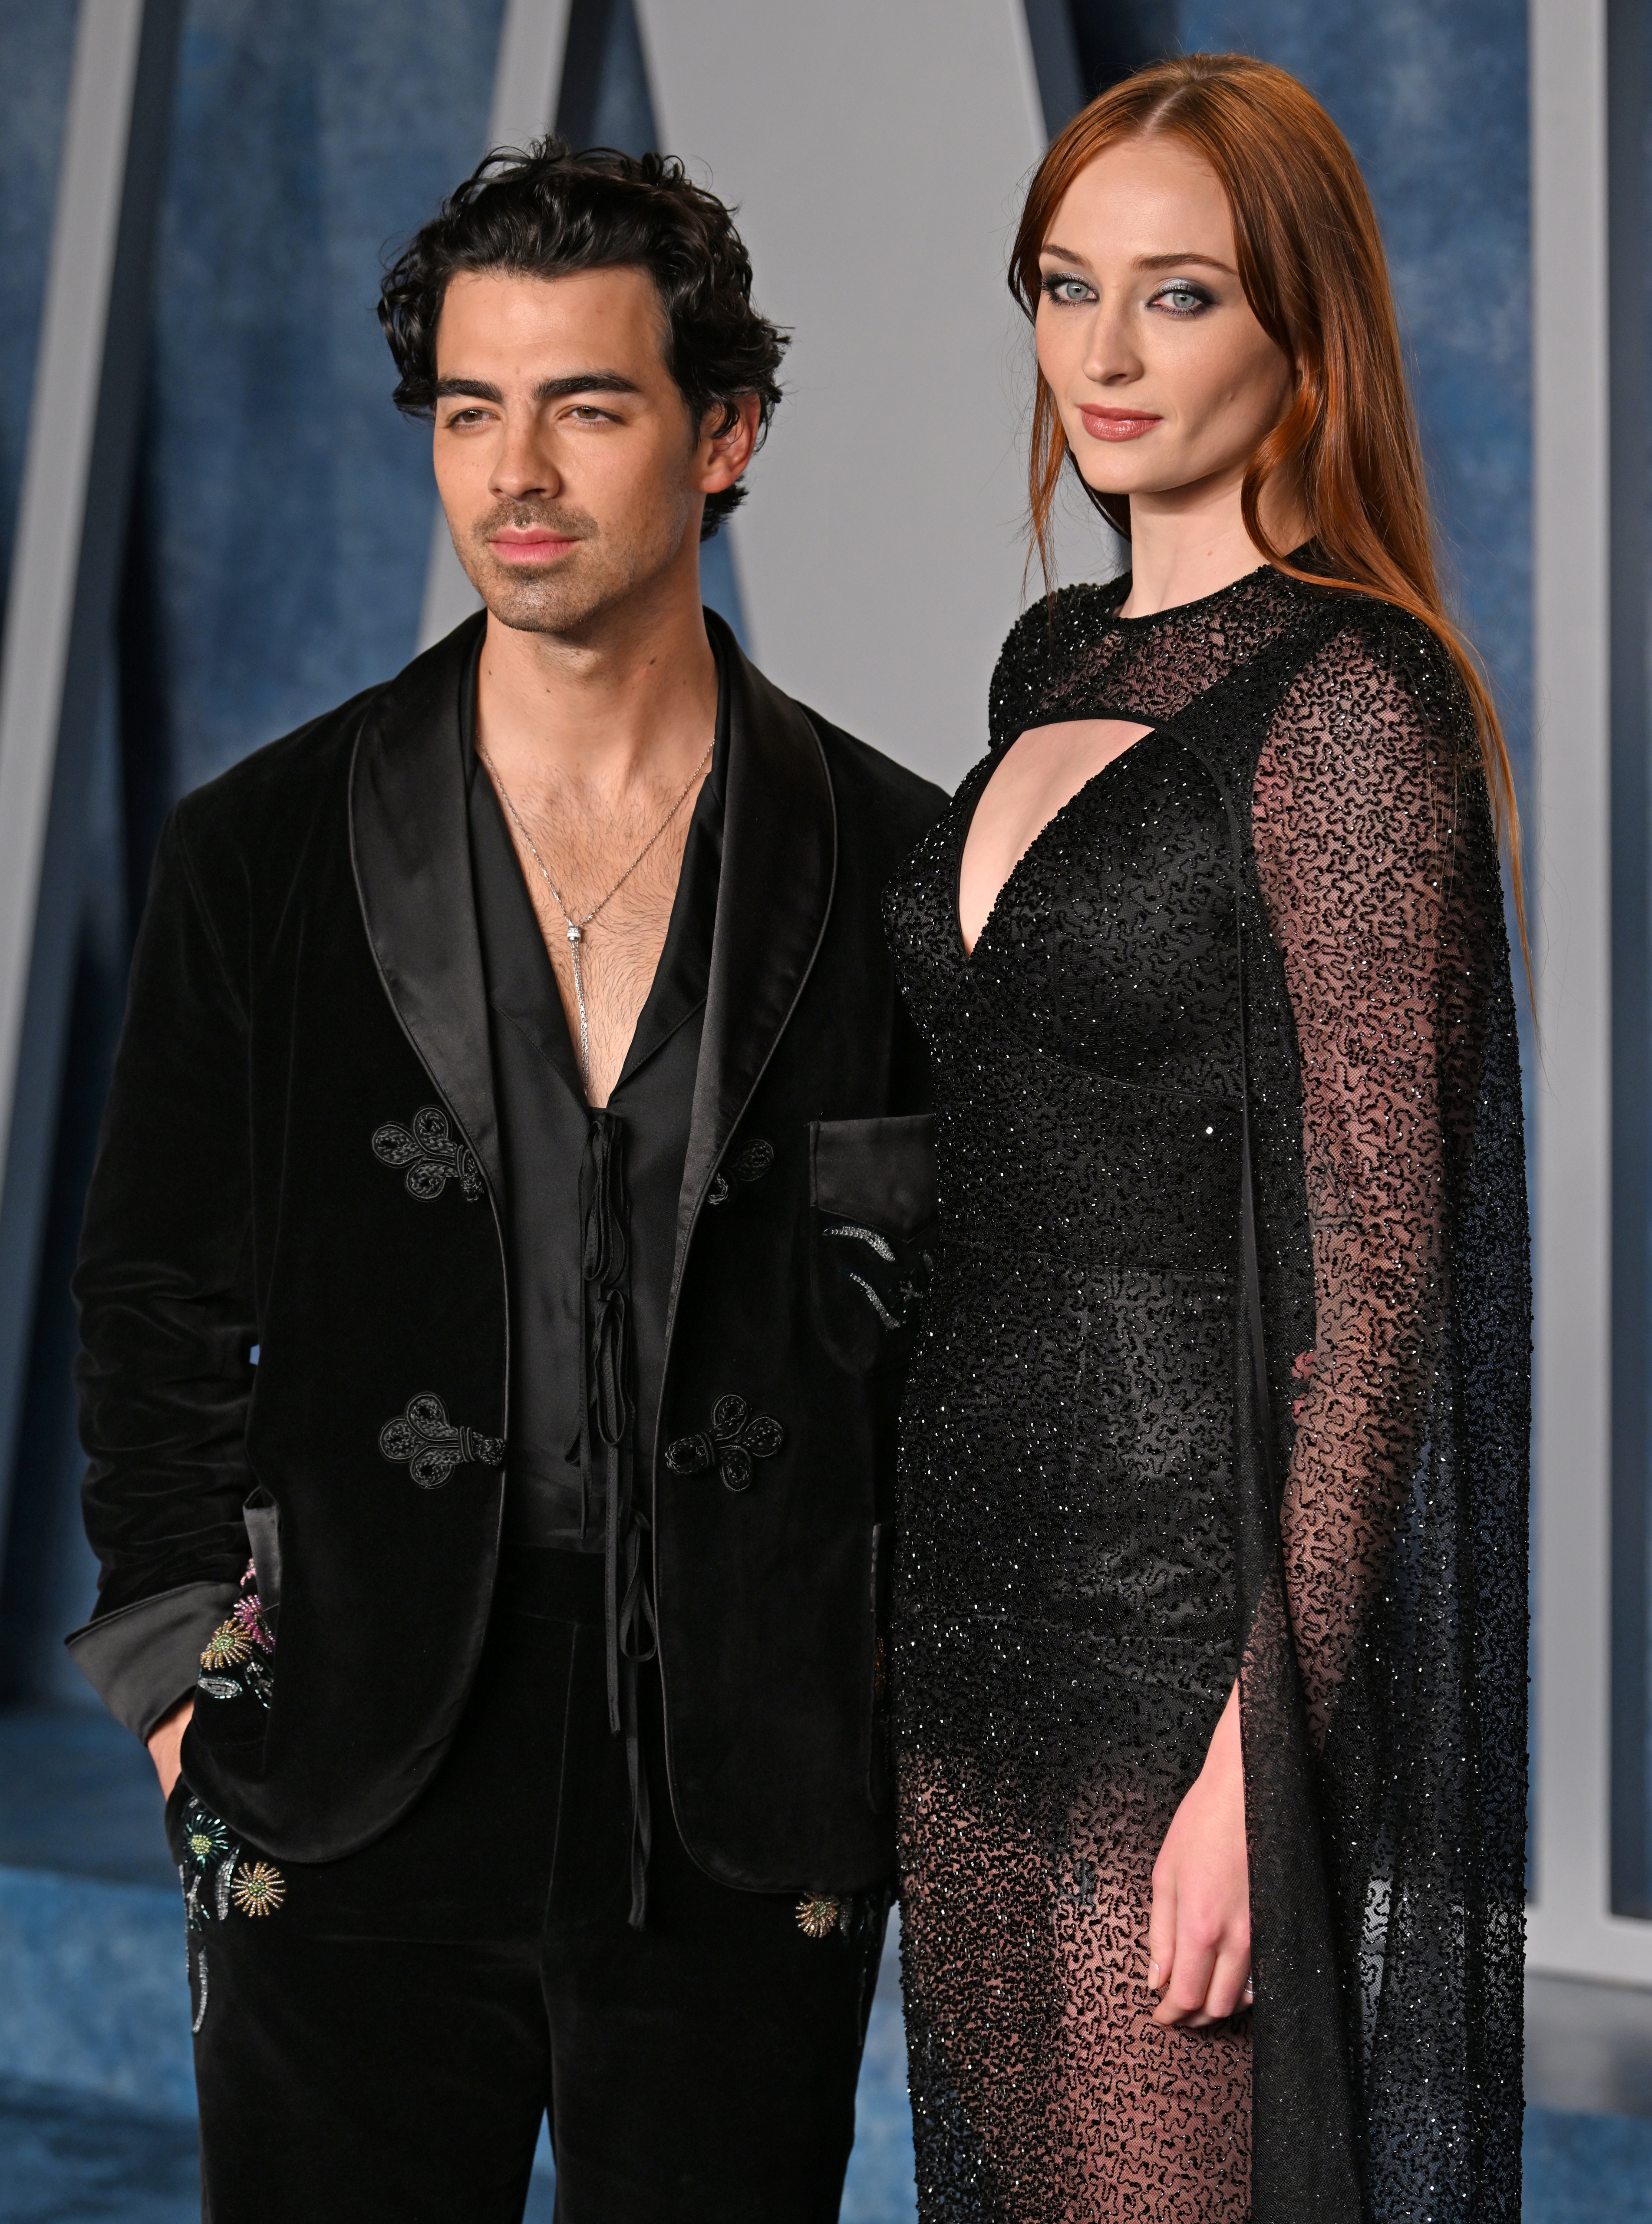 closeup of the Sophie and Joe on the red carpet